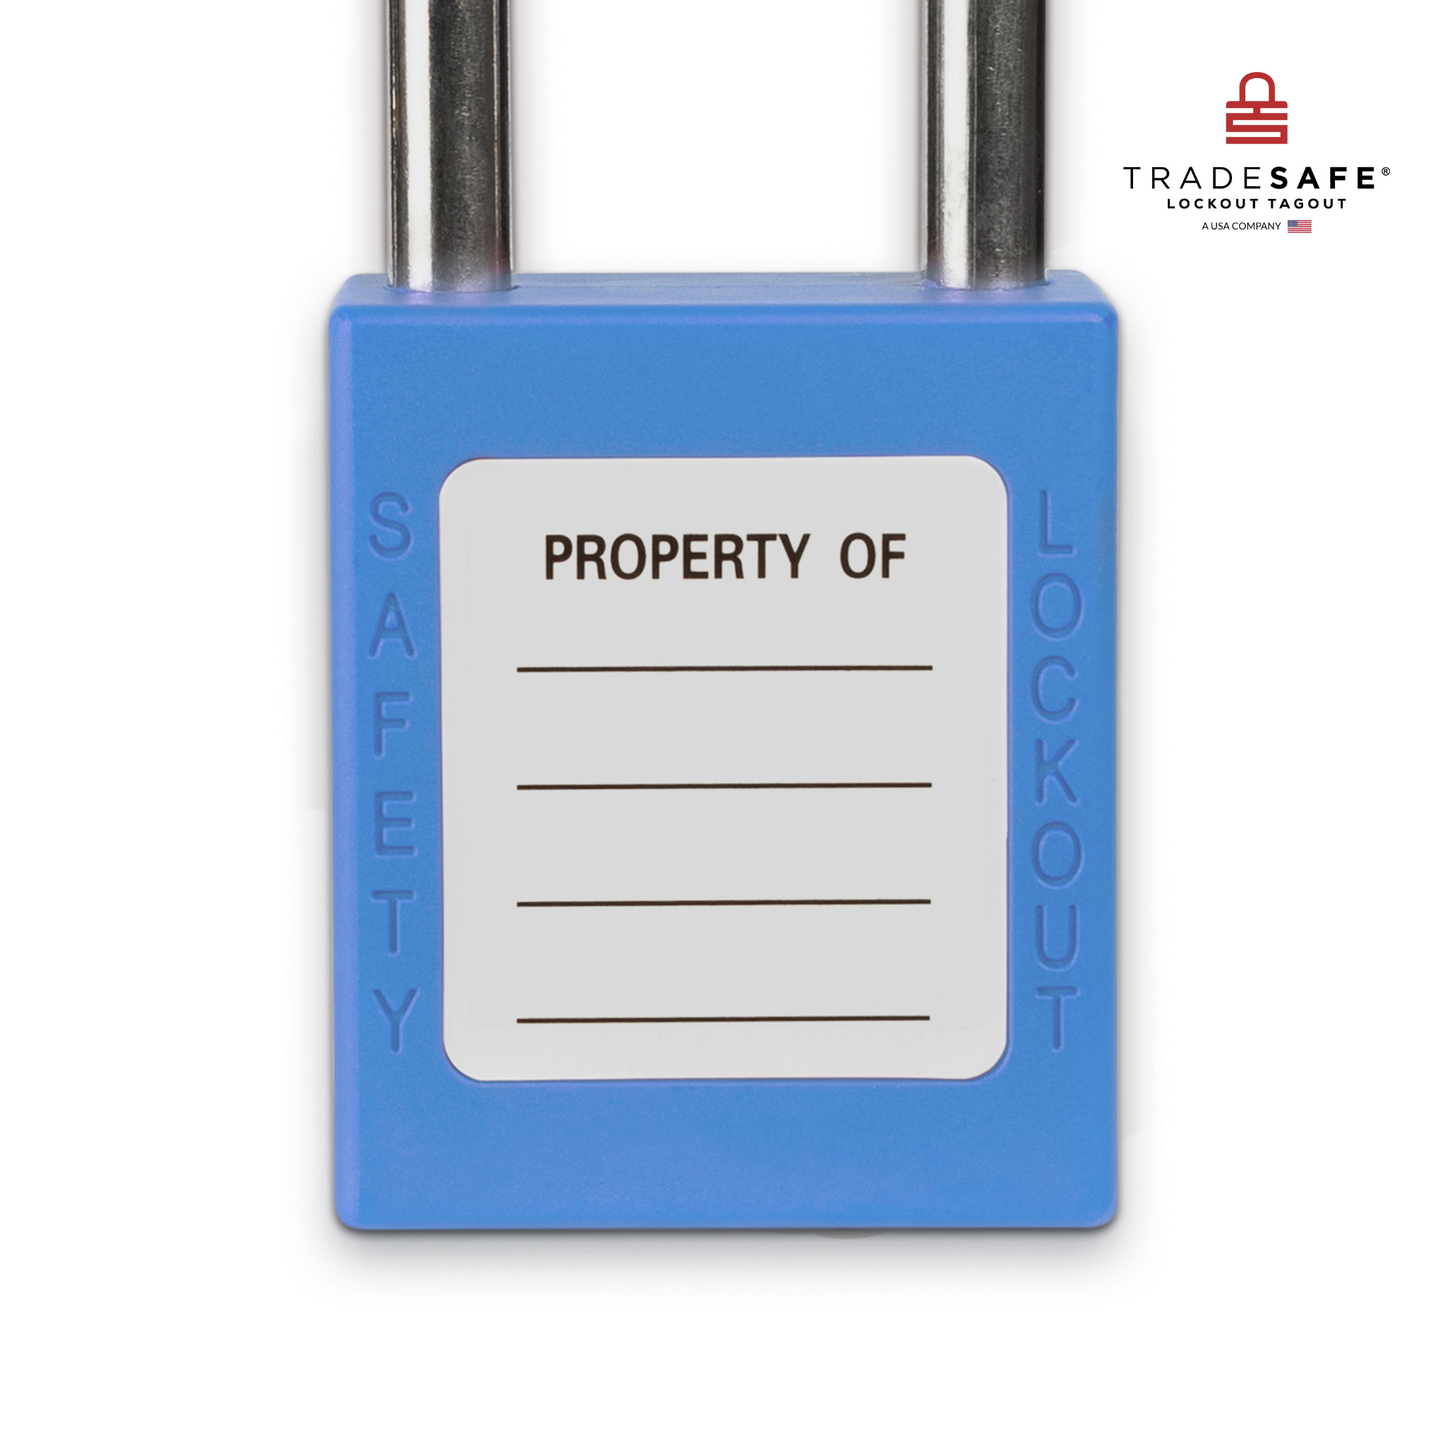 close-up view of the writable area at the back of the blue loto padlock's body